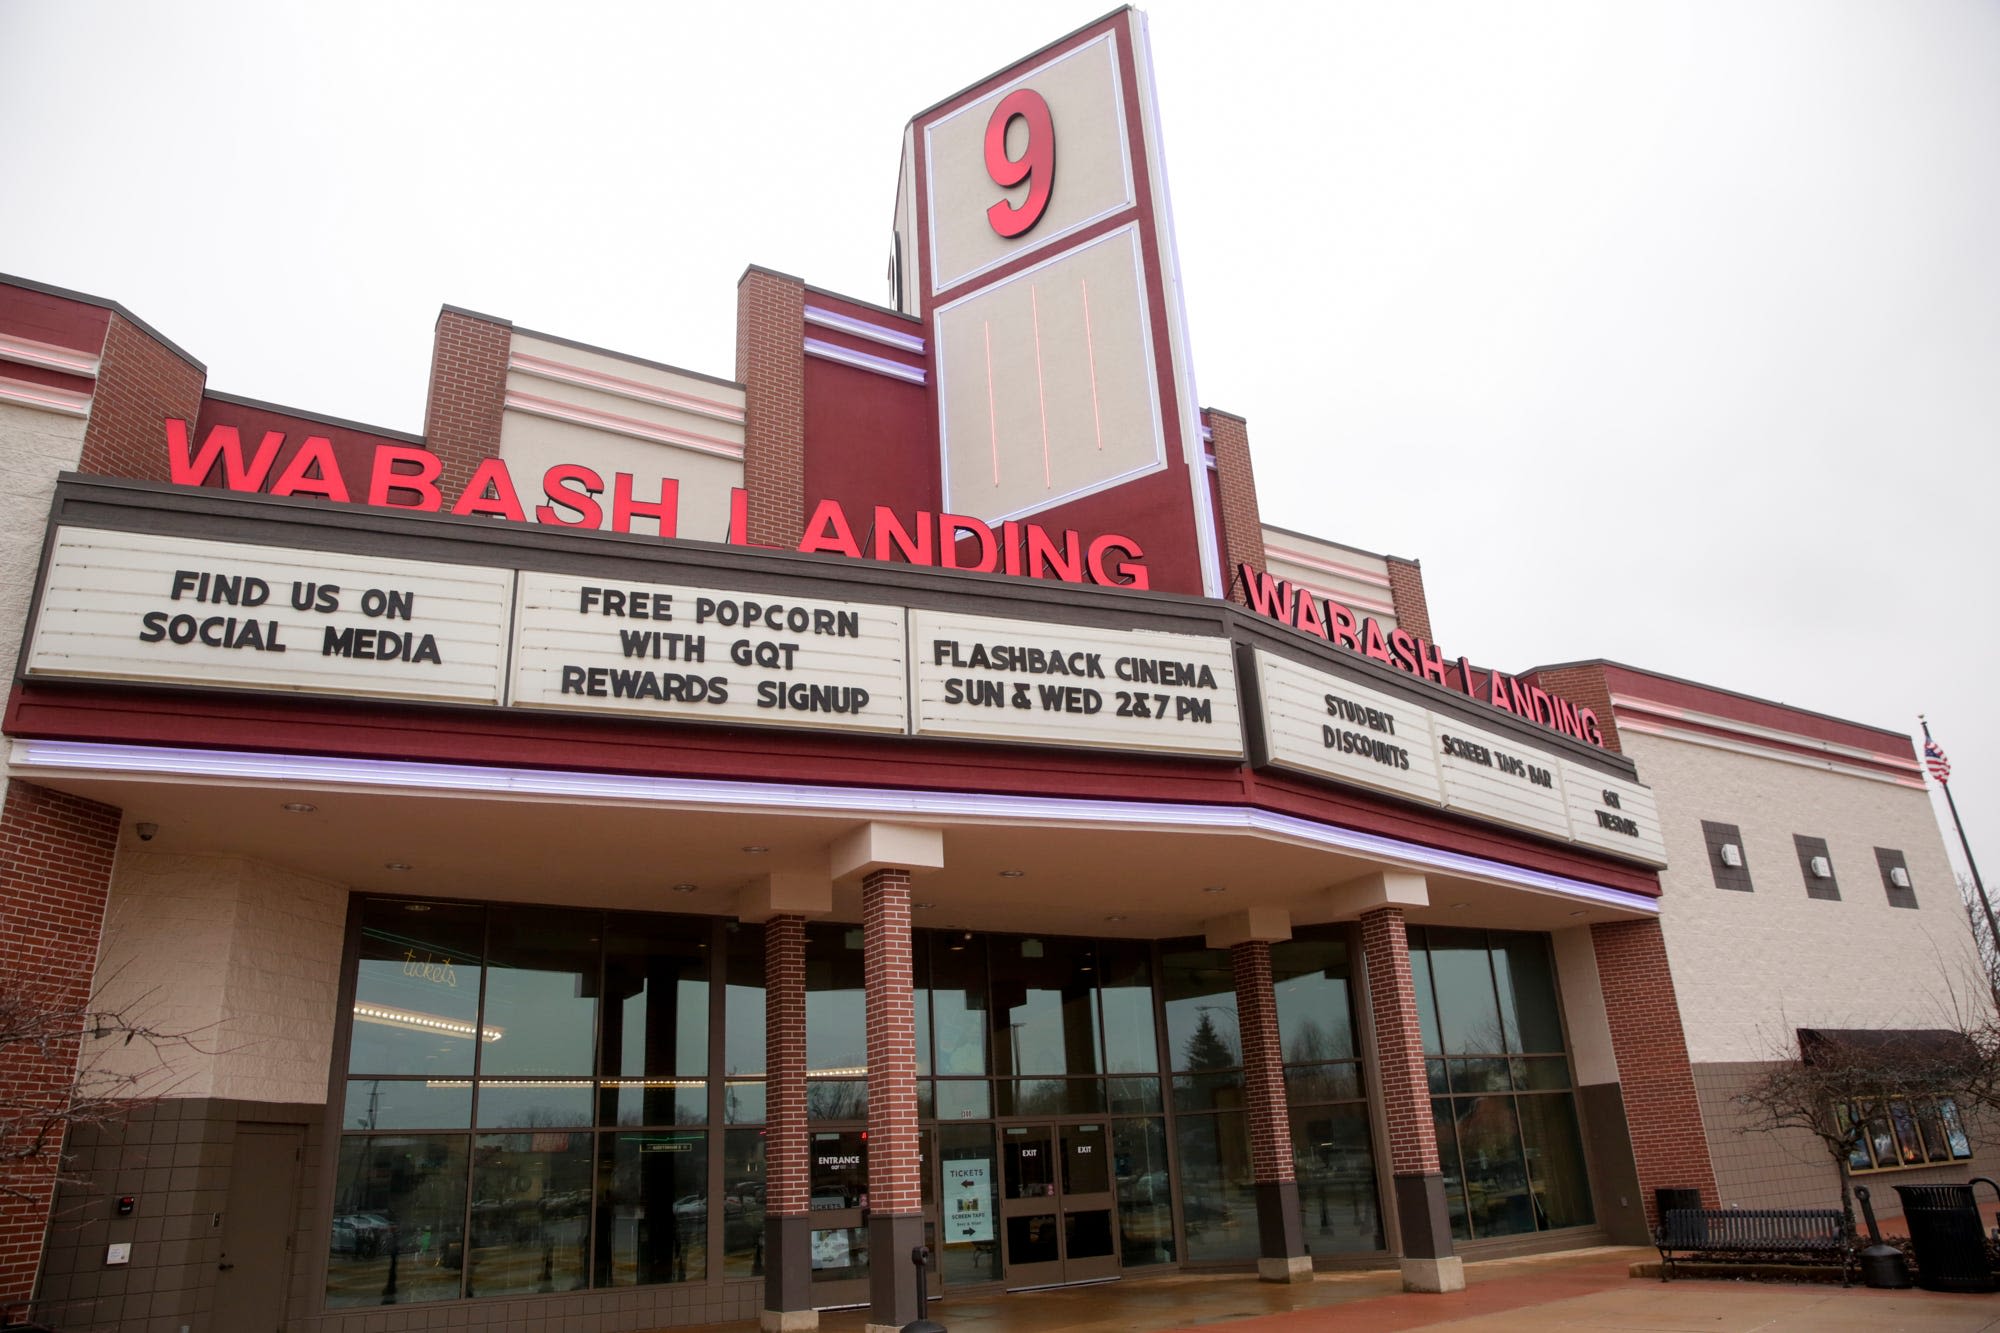 West Lafayette's Wabash Landing 9 theater to show free family films over the summer